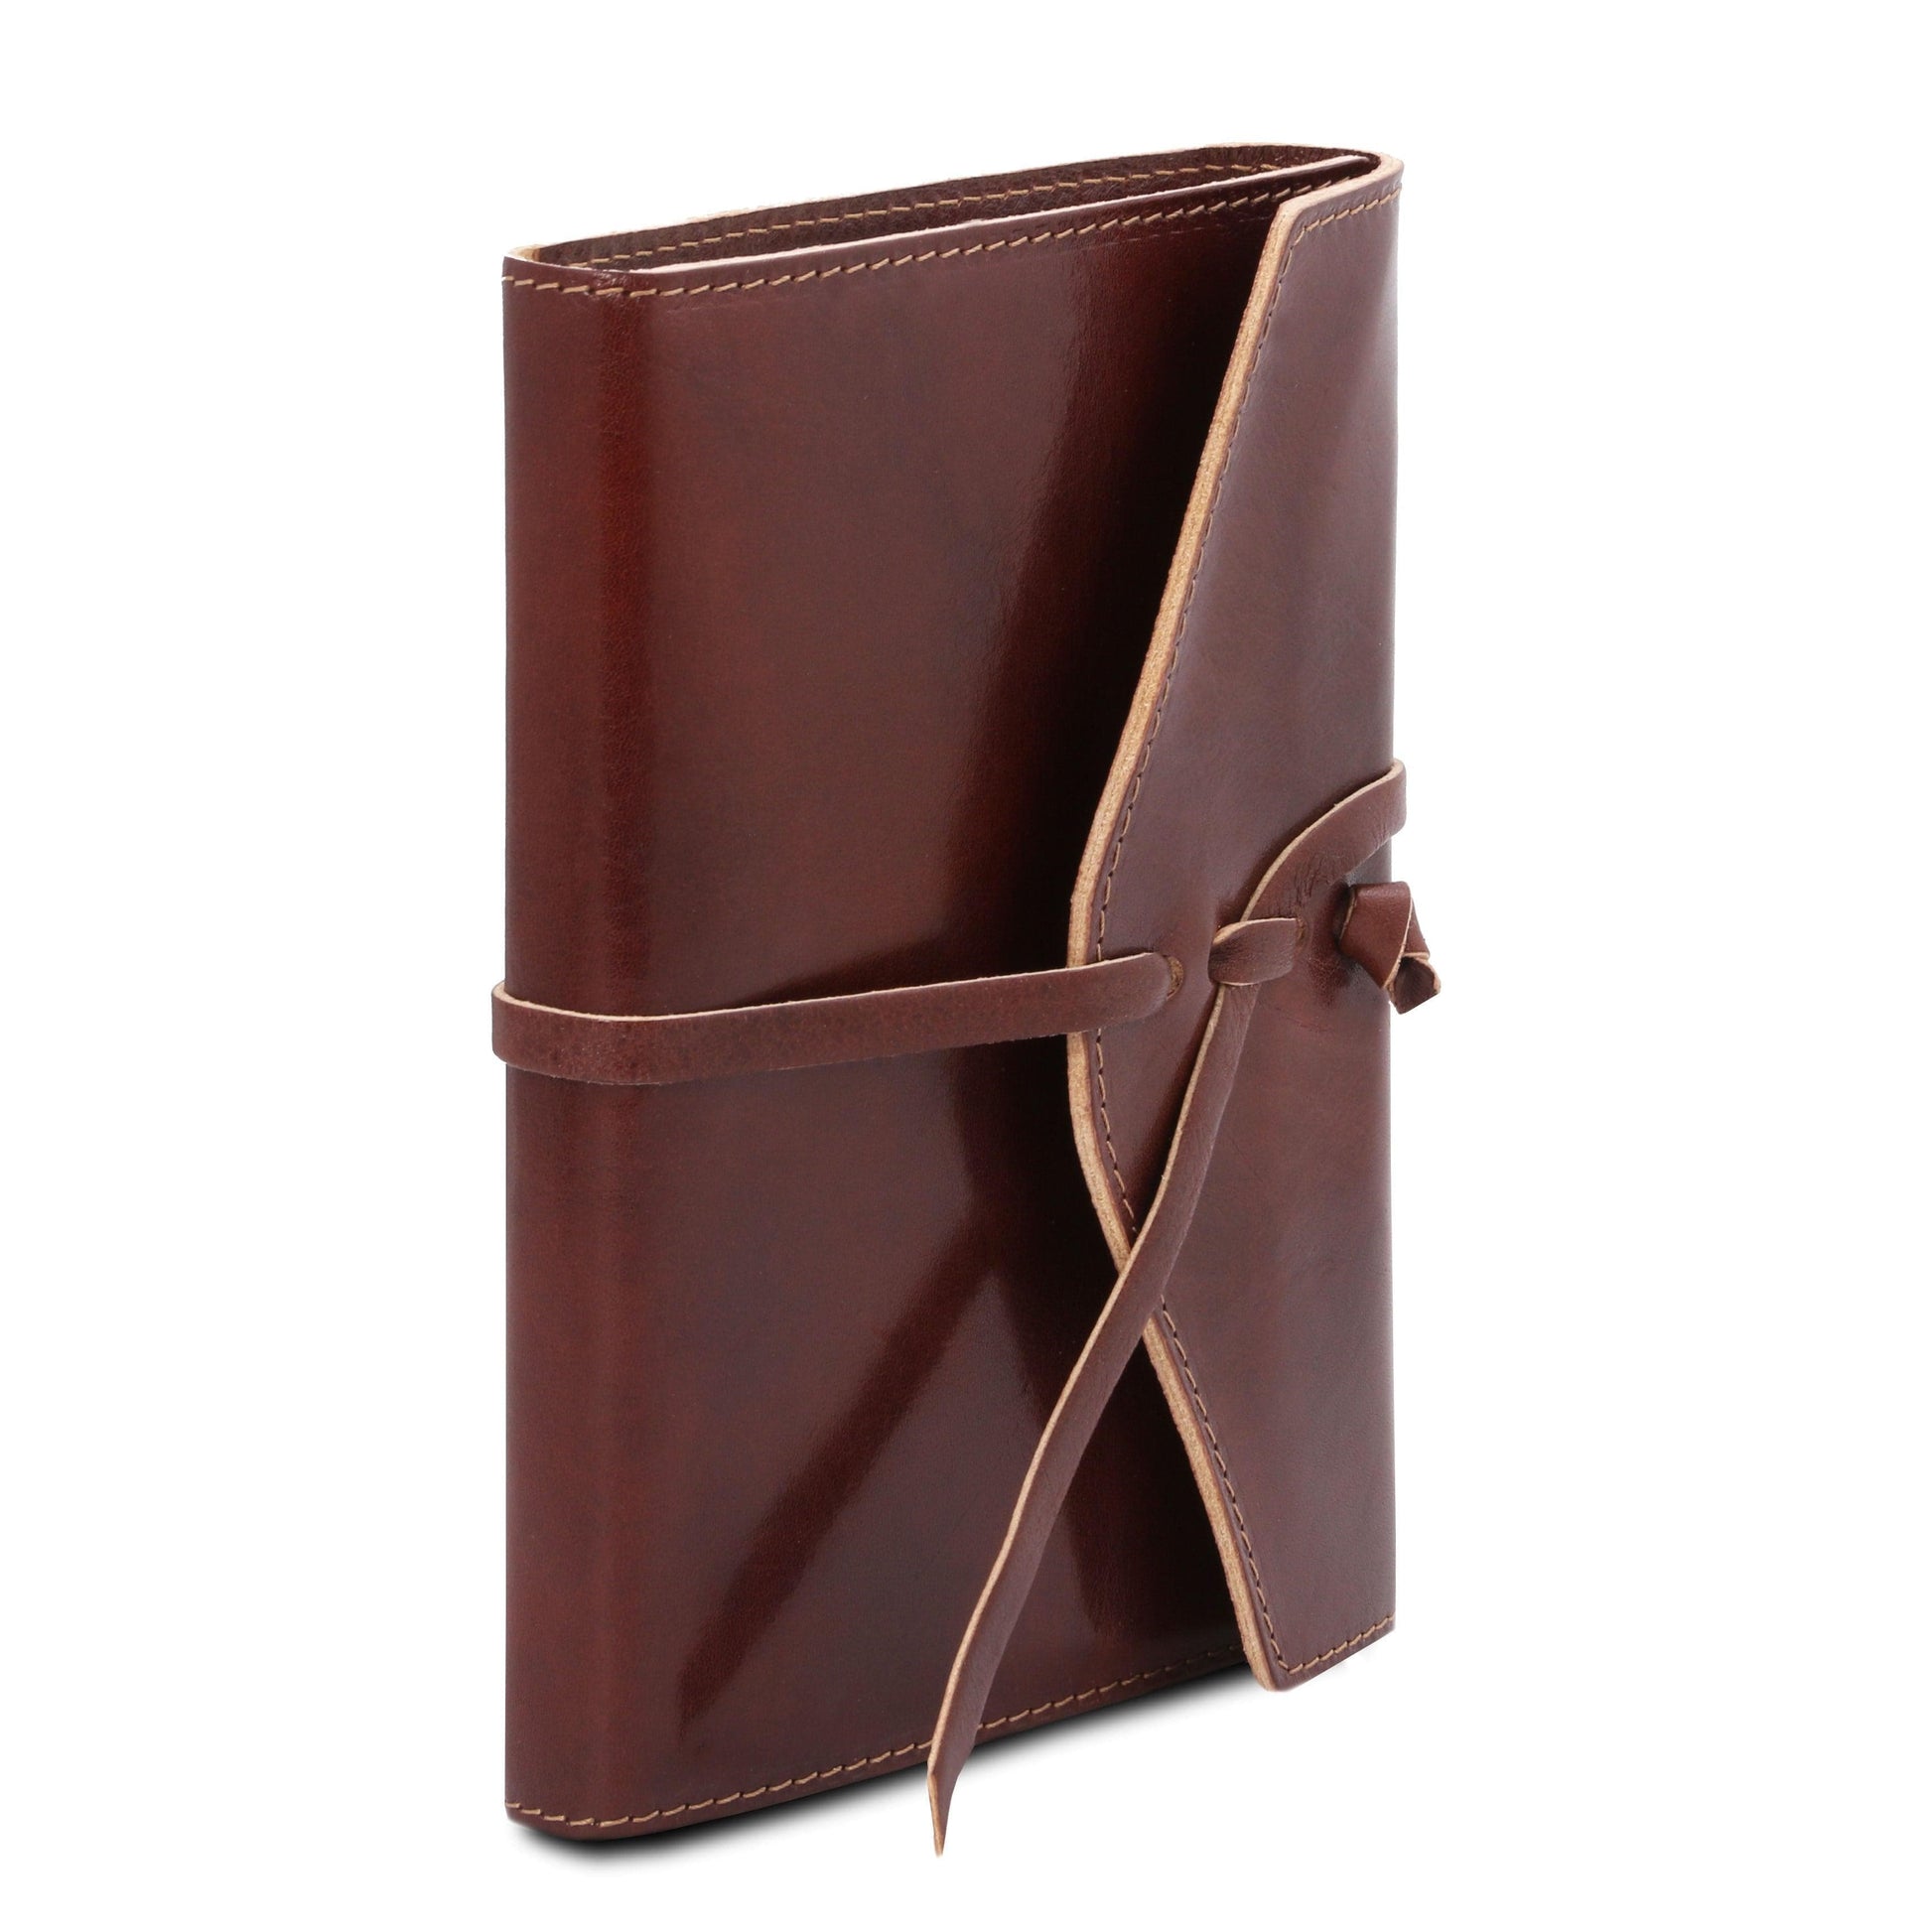 Leather Journal / Notebook & Refill Notebook Paper | TL142027 & TL142046 - Premium Travel leather accessories - Shop now at San Rocco Italia